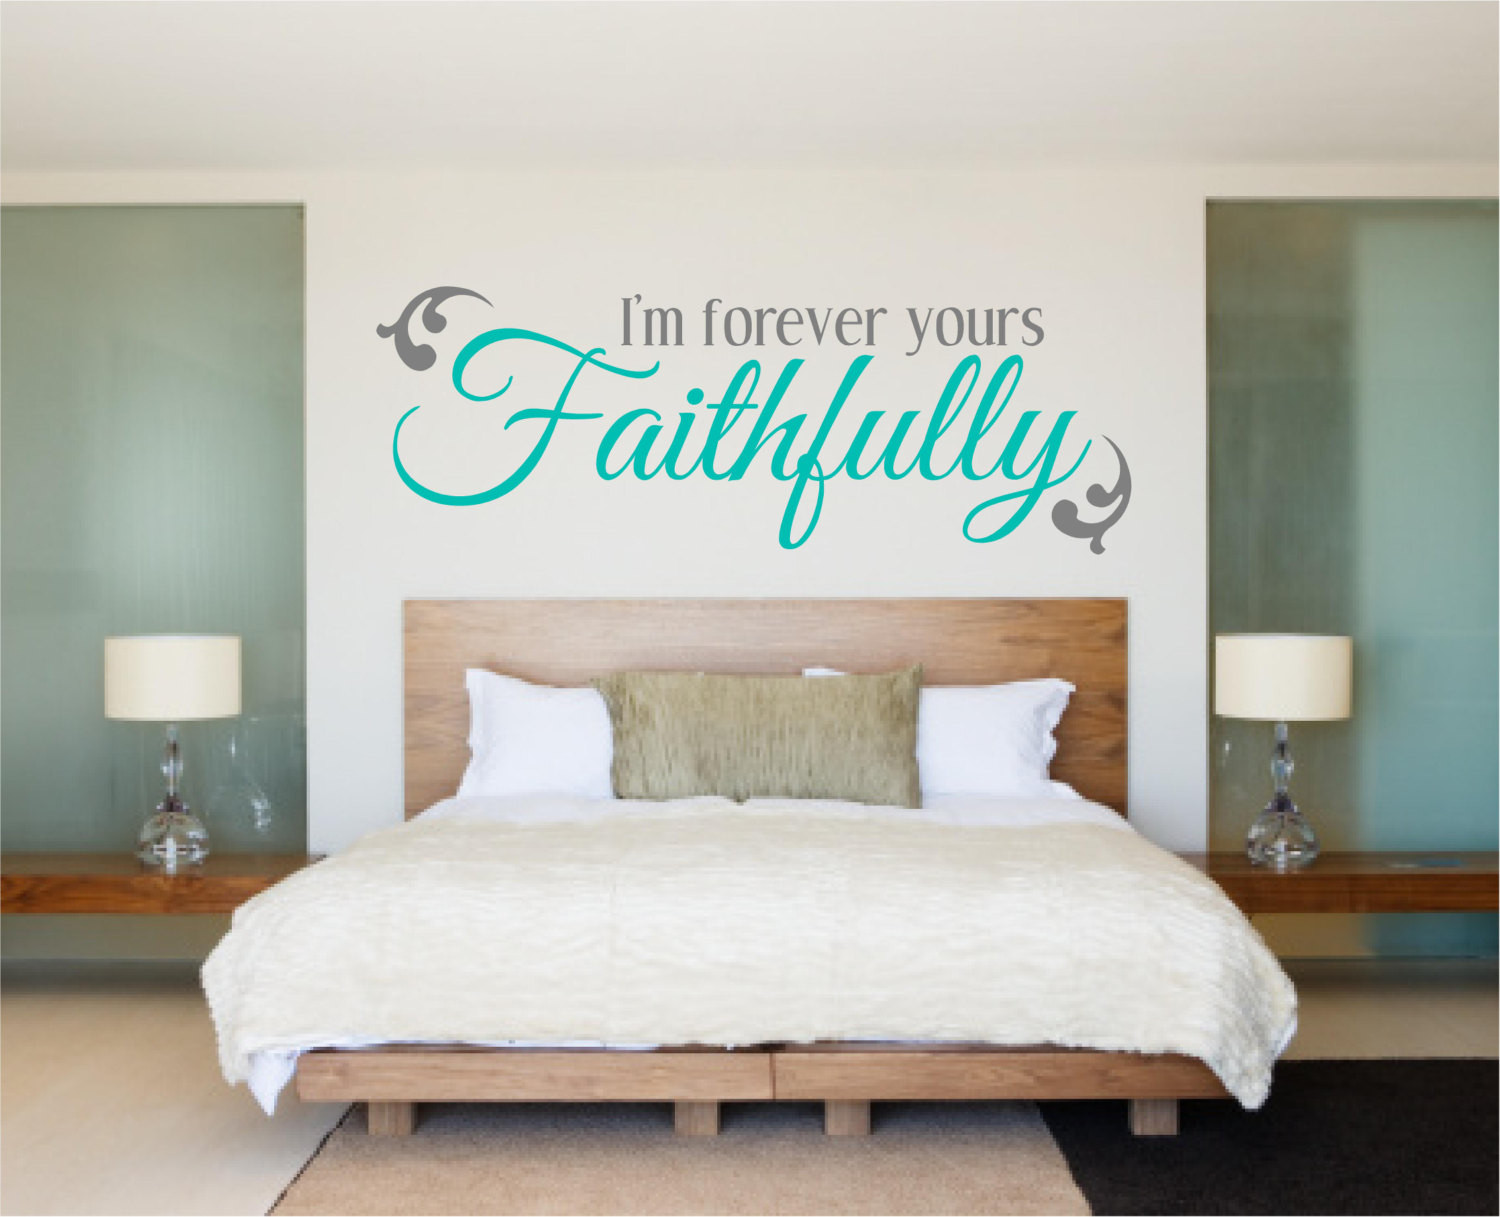 Bedroom Wall Decals
 Bedroom Decal Bedroom Wall Decal Love Decal I m Forever